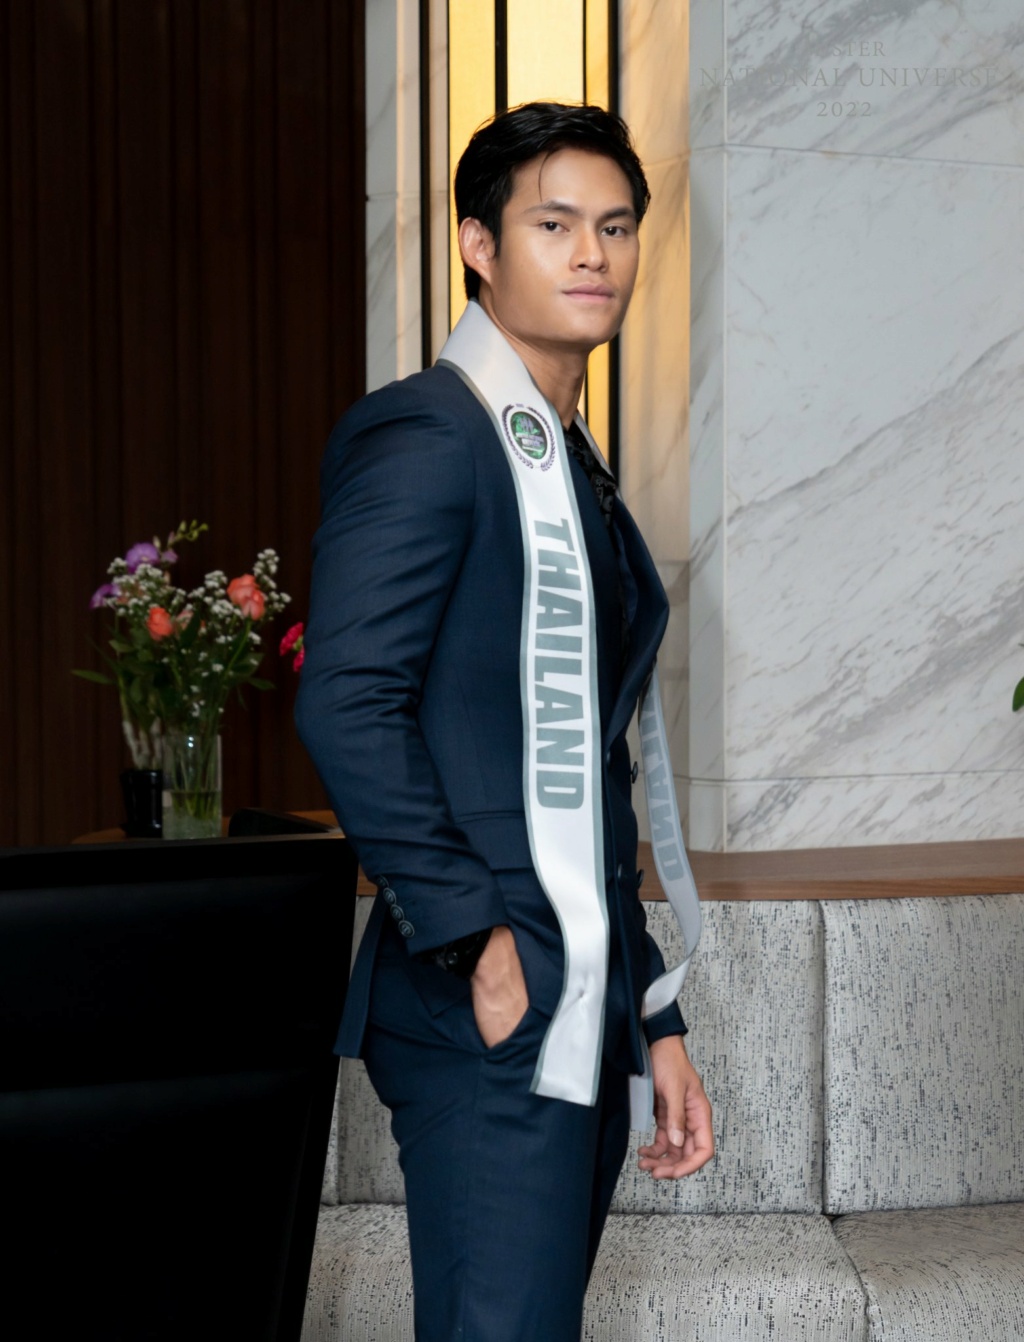 Mister National Universe 2022 is Việt Hoàng from Vietnam 28456010